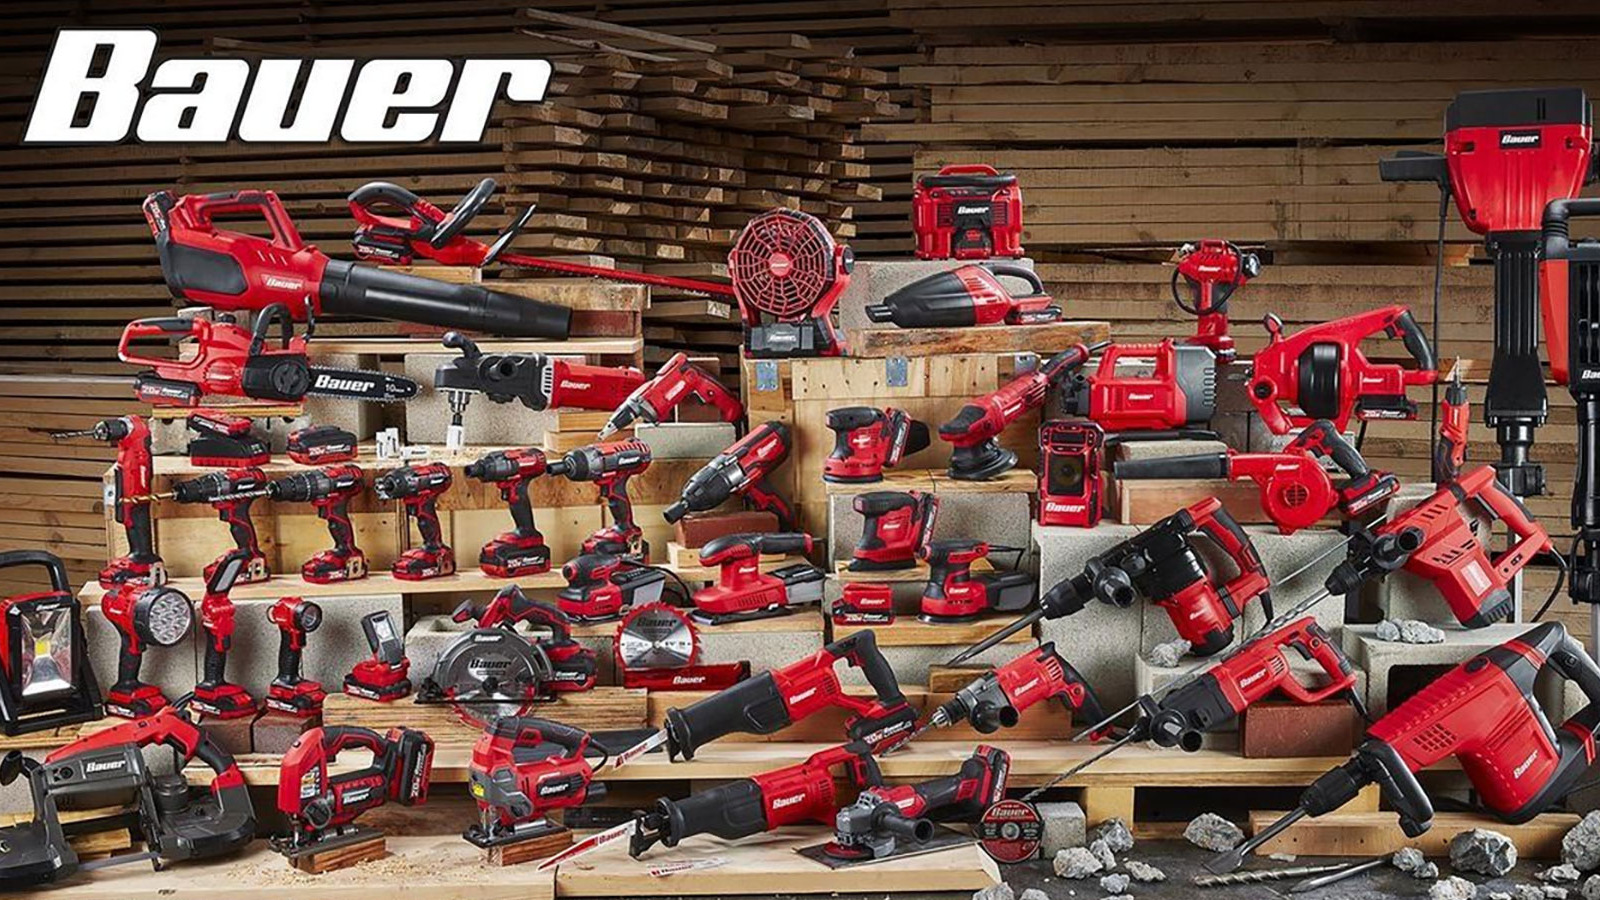 Who Makes Bauer Power Tools, And Are They Any Good? – SlashGear